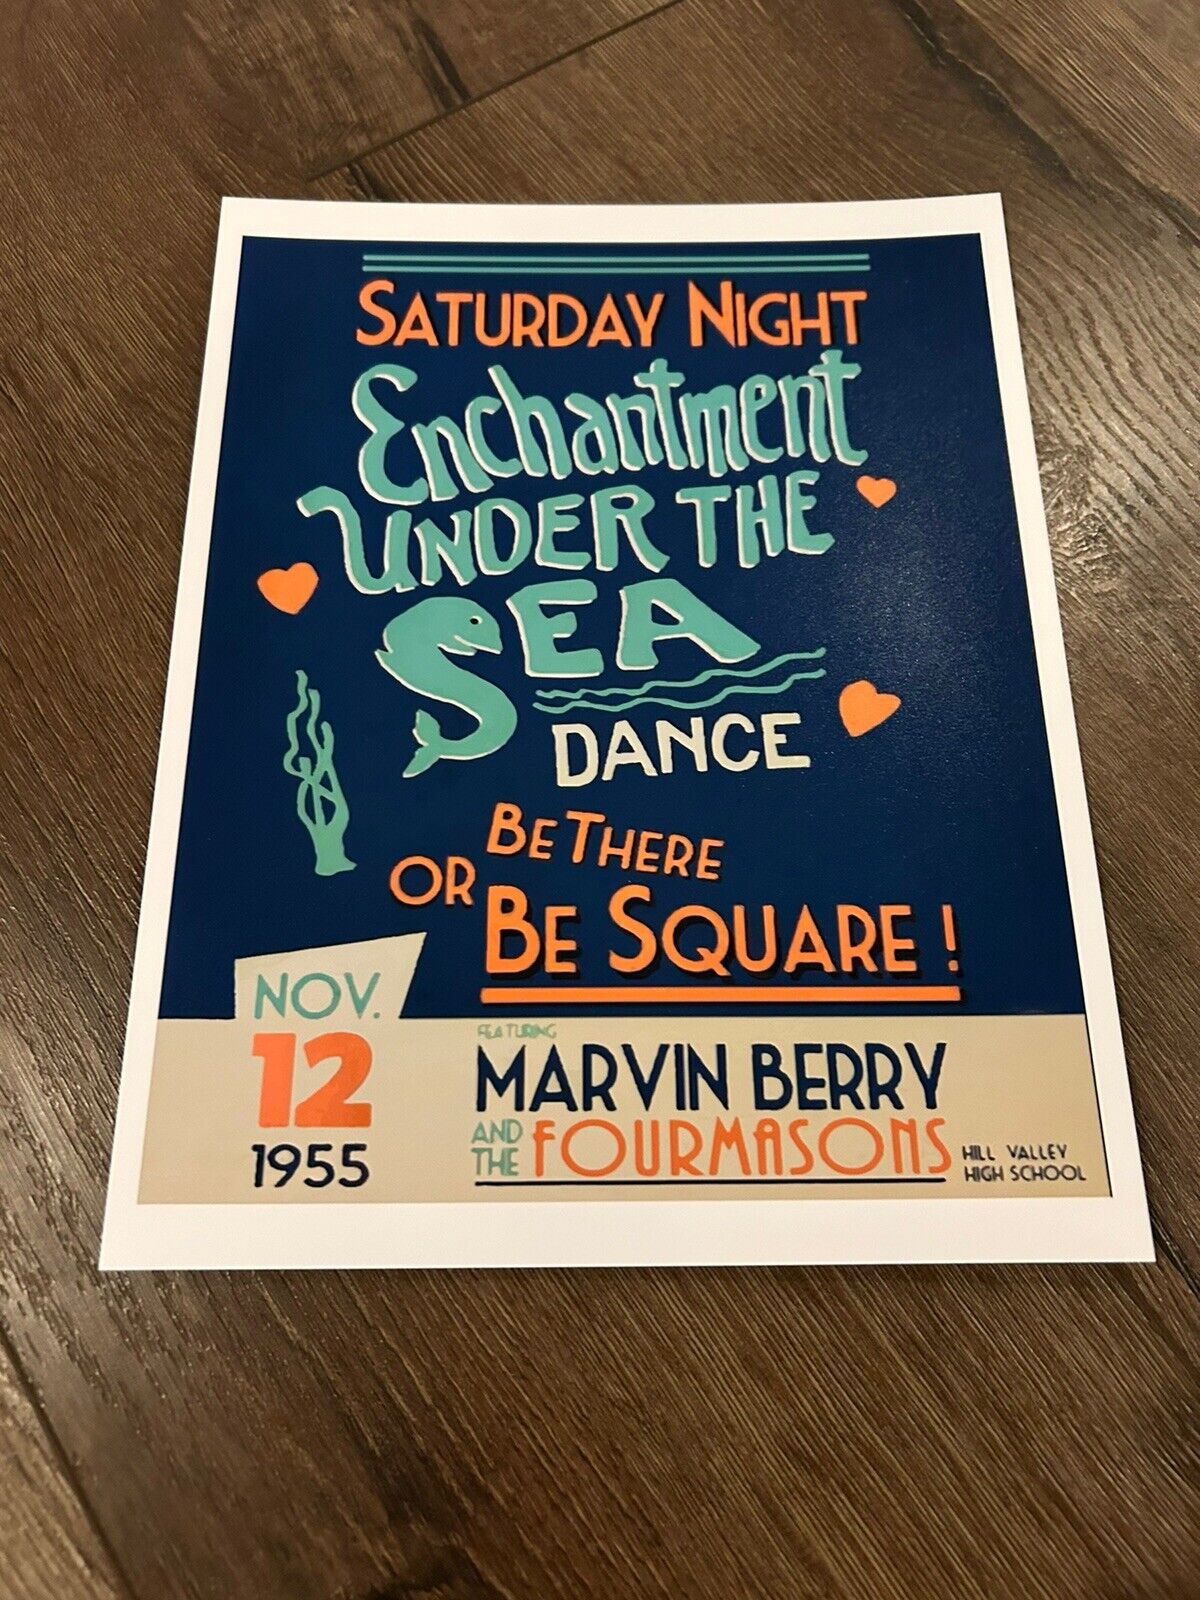 BACK TO THE FUTURE Art Print Photo 8x10 Poster Enchantment Under The Sea Dance